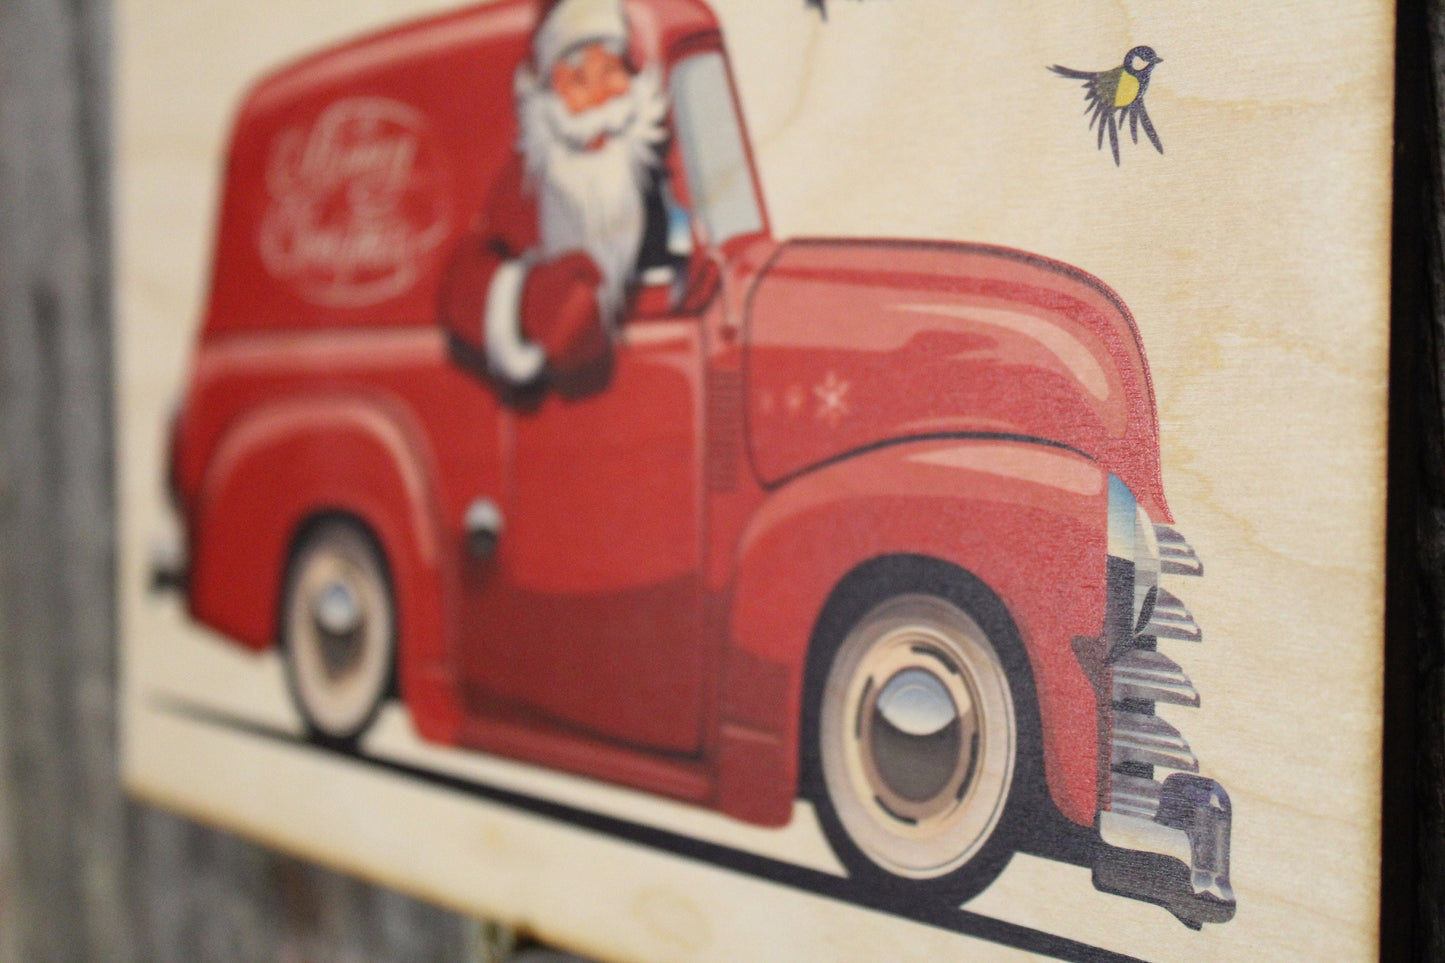 Santa in a Panel Truck Vintage Retro Merry Christmas Rustic Wooden Sign Wall Decor Art Plaque Wood Print